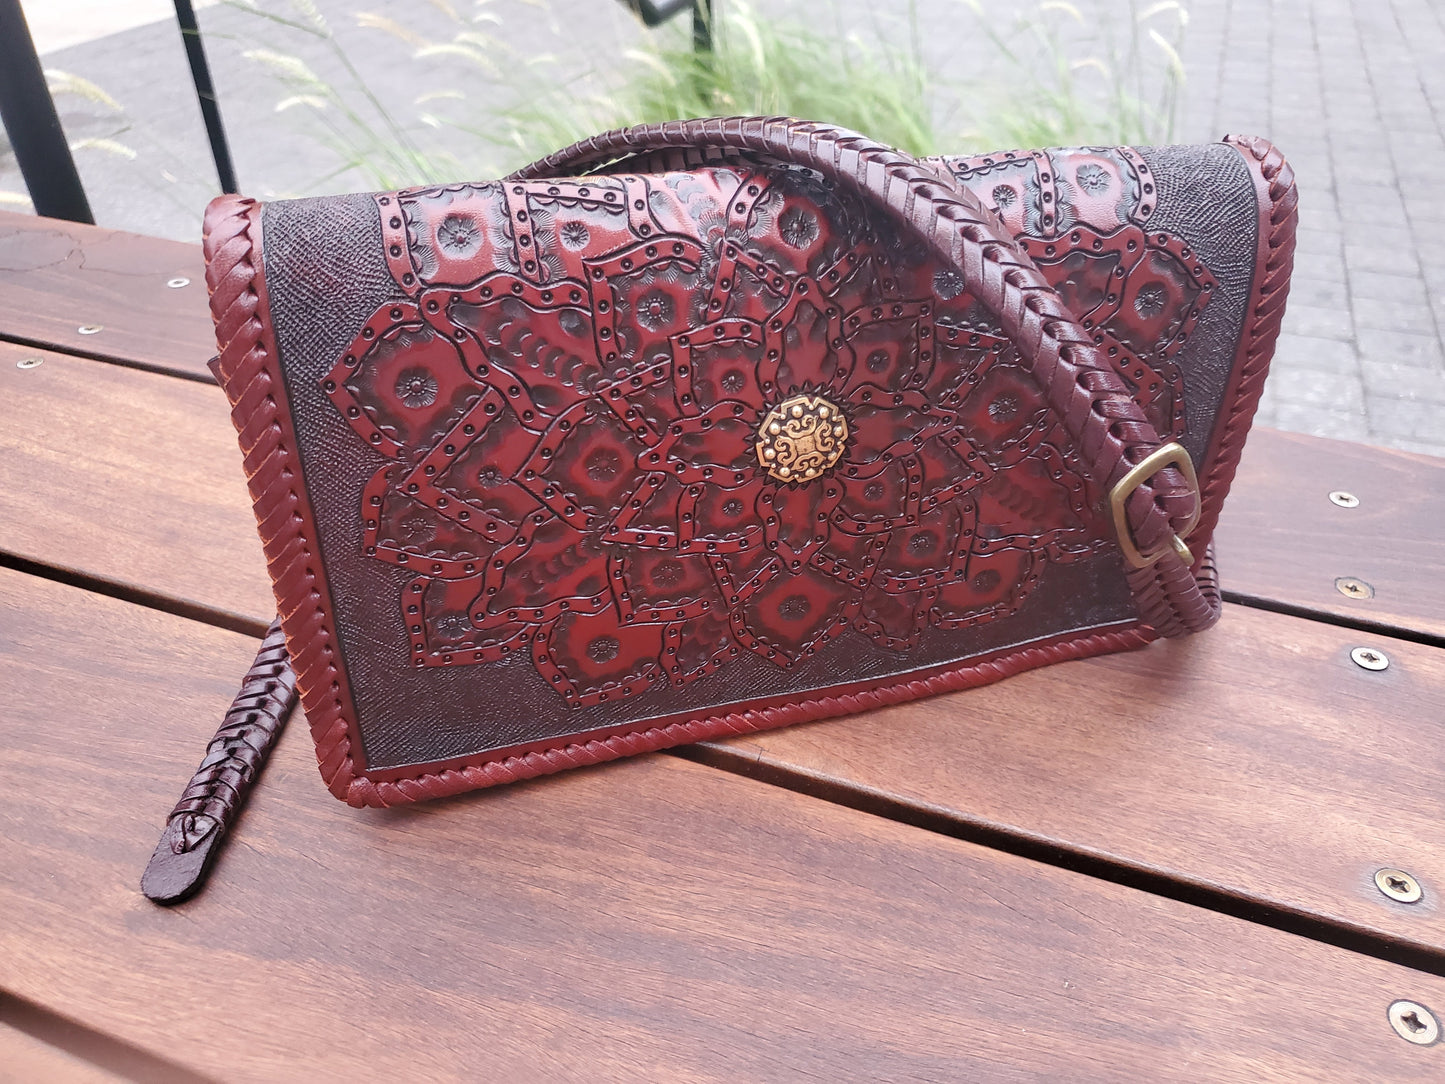 Hand Made Leather Crossbody Bag "CECELIA" by MIOHERMOSA Honey Cecilia Flower